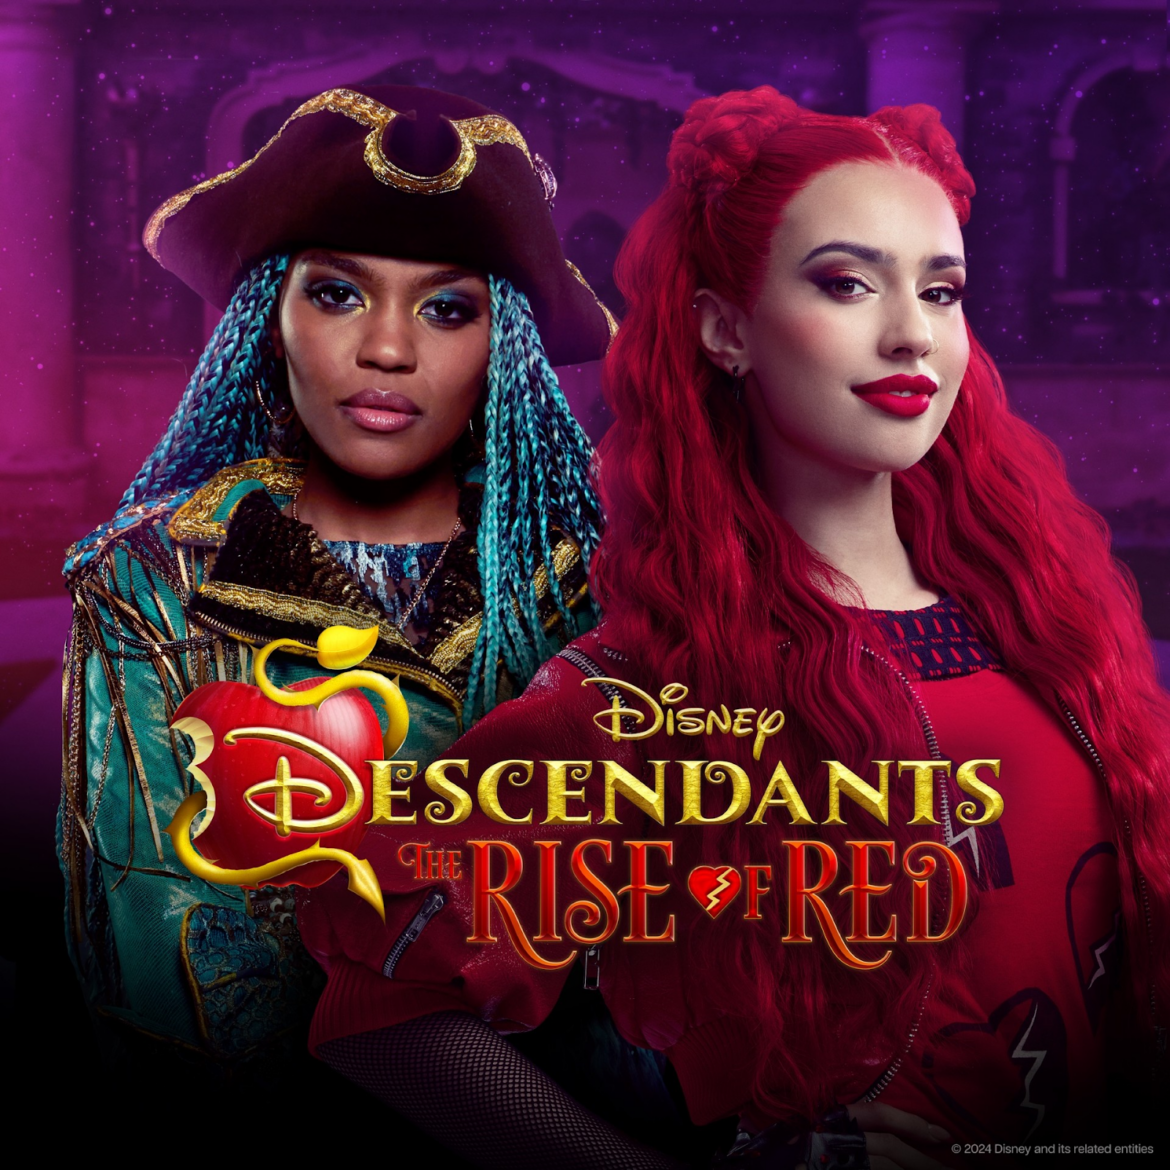 China Anne Mcclain & Kylie Cantrall Perform “What’s My Name” from Descendants: The Rise of Red Soundtrack